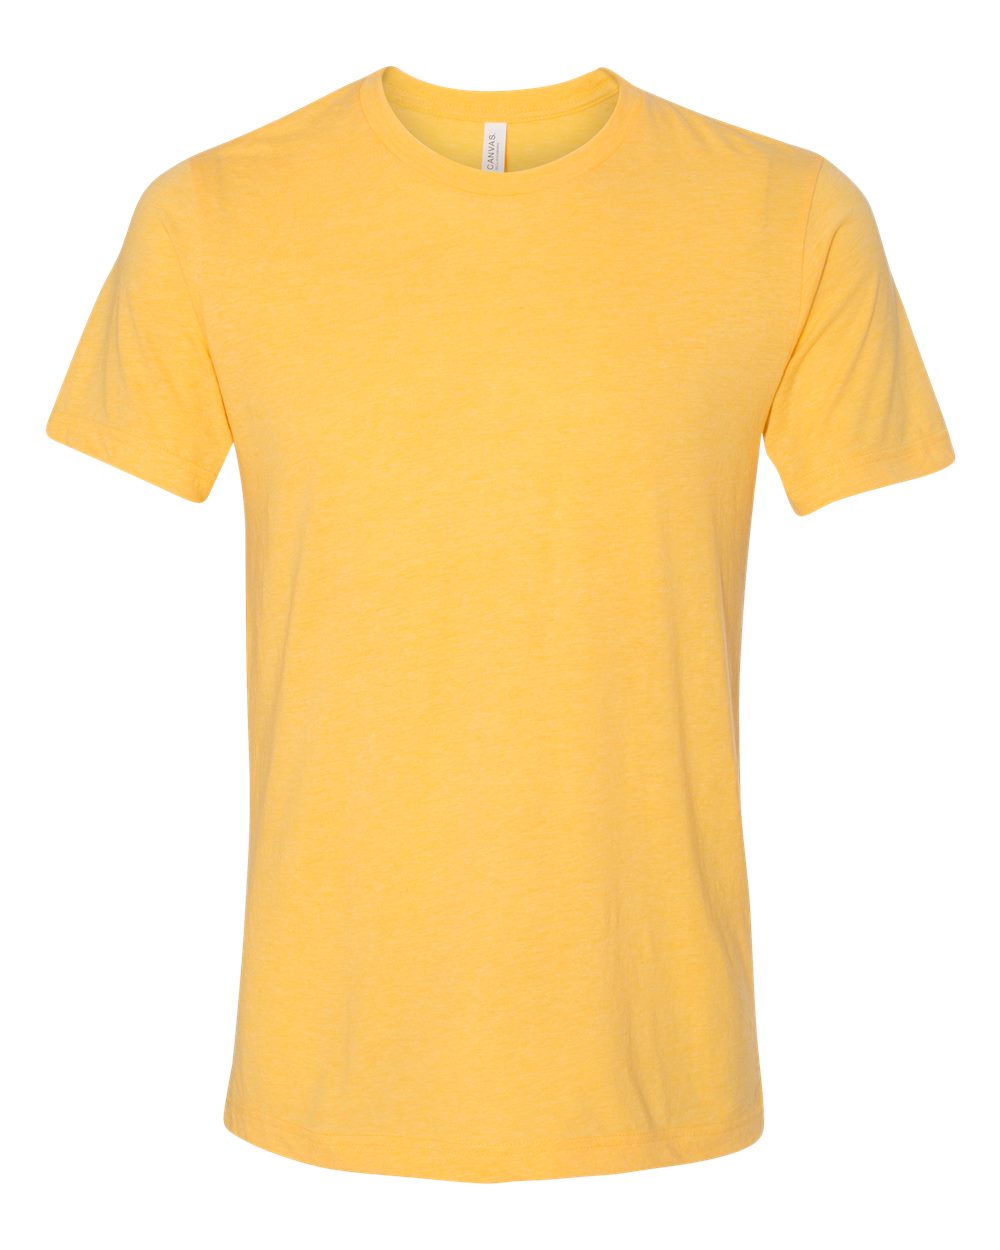 Bella + Canvas Triblend Tee (3413) in Yellow Gold Triblend